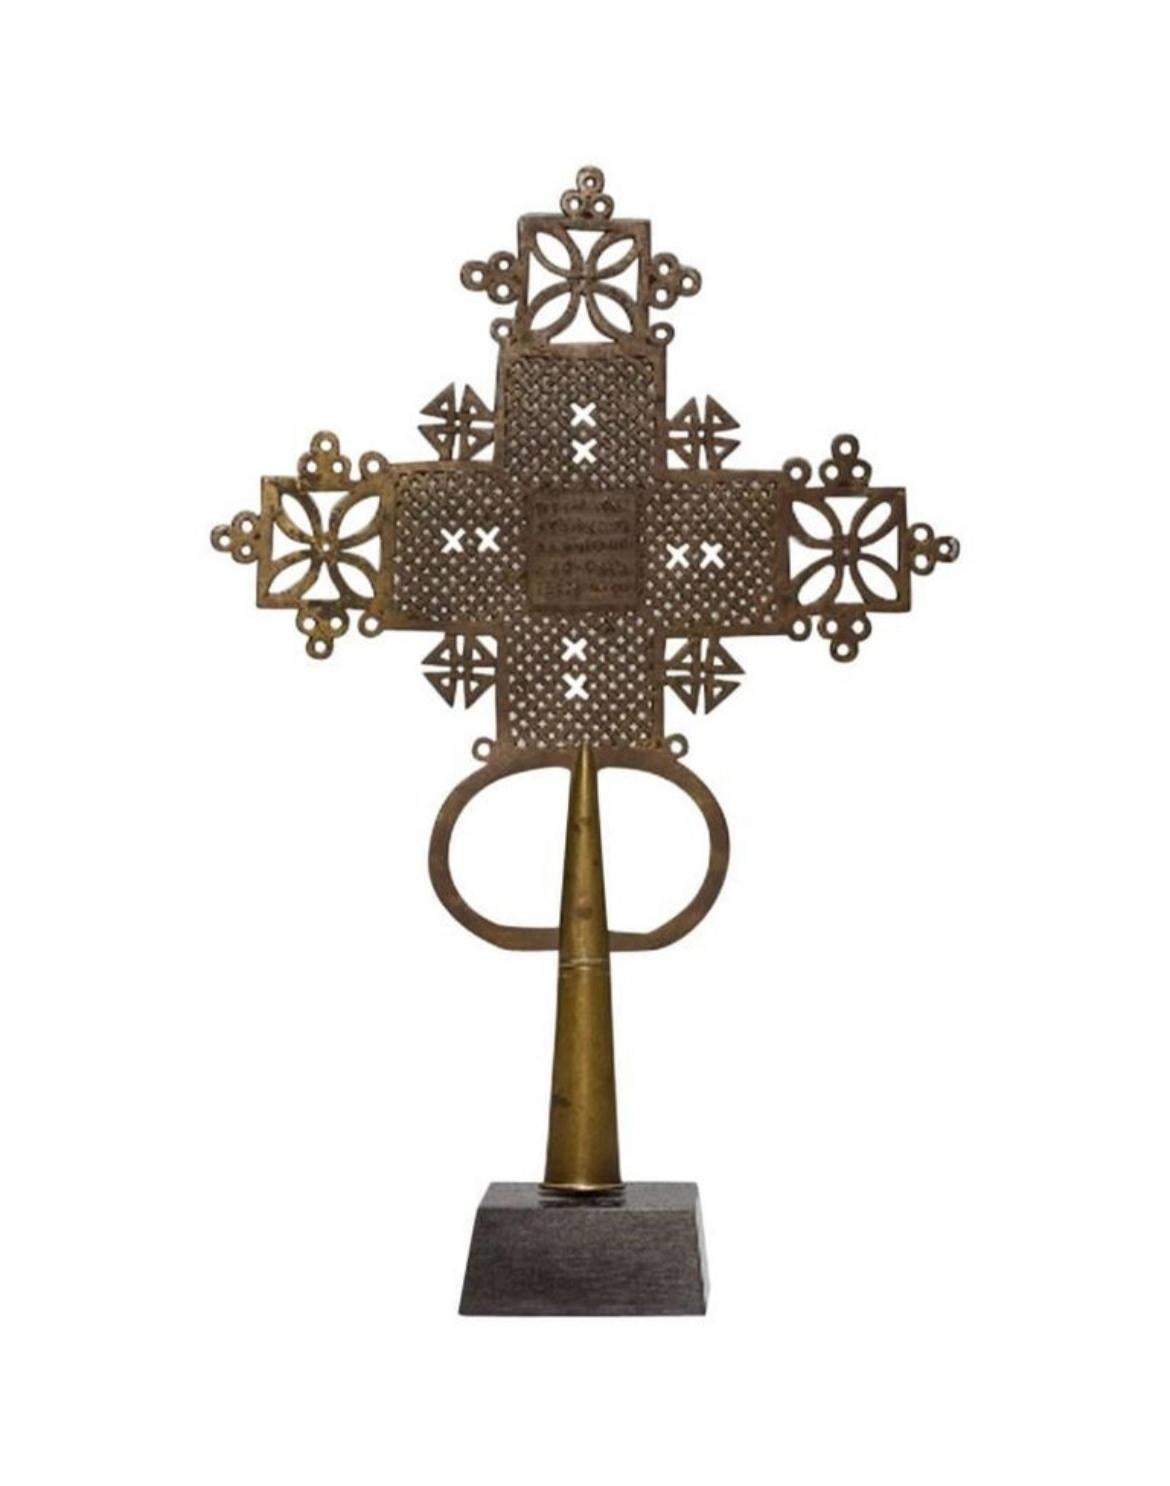 Very unique Ethiopian processional cross, brass, early 20th century.
Provenance: Collection of Lillian Florsheim / Thence by descent.